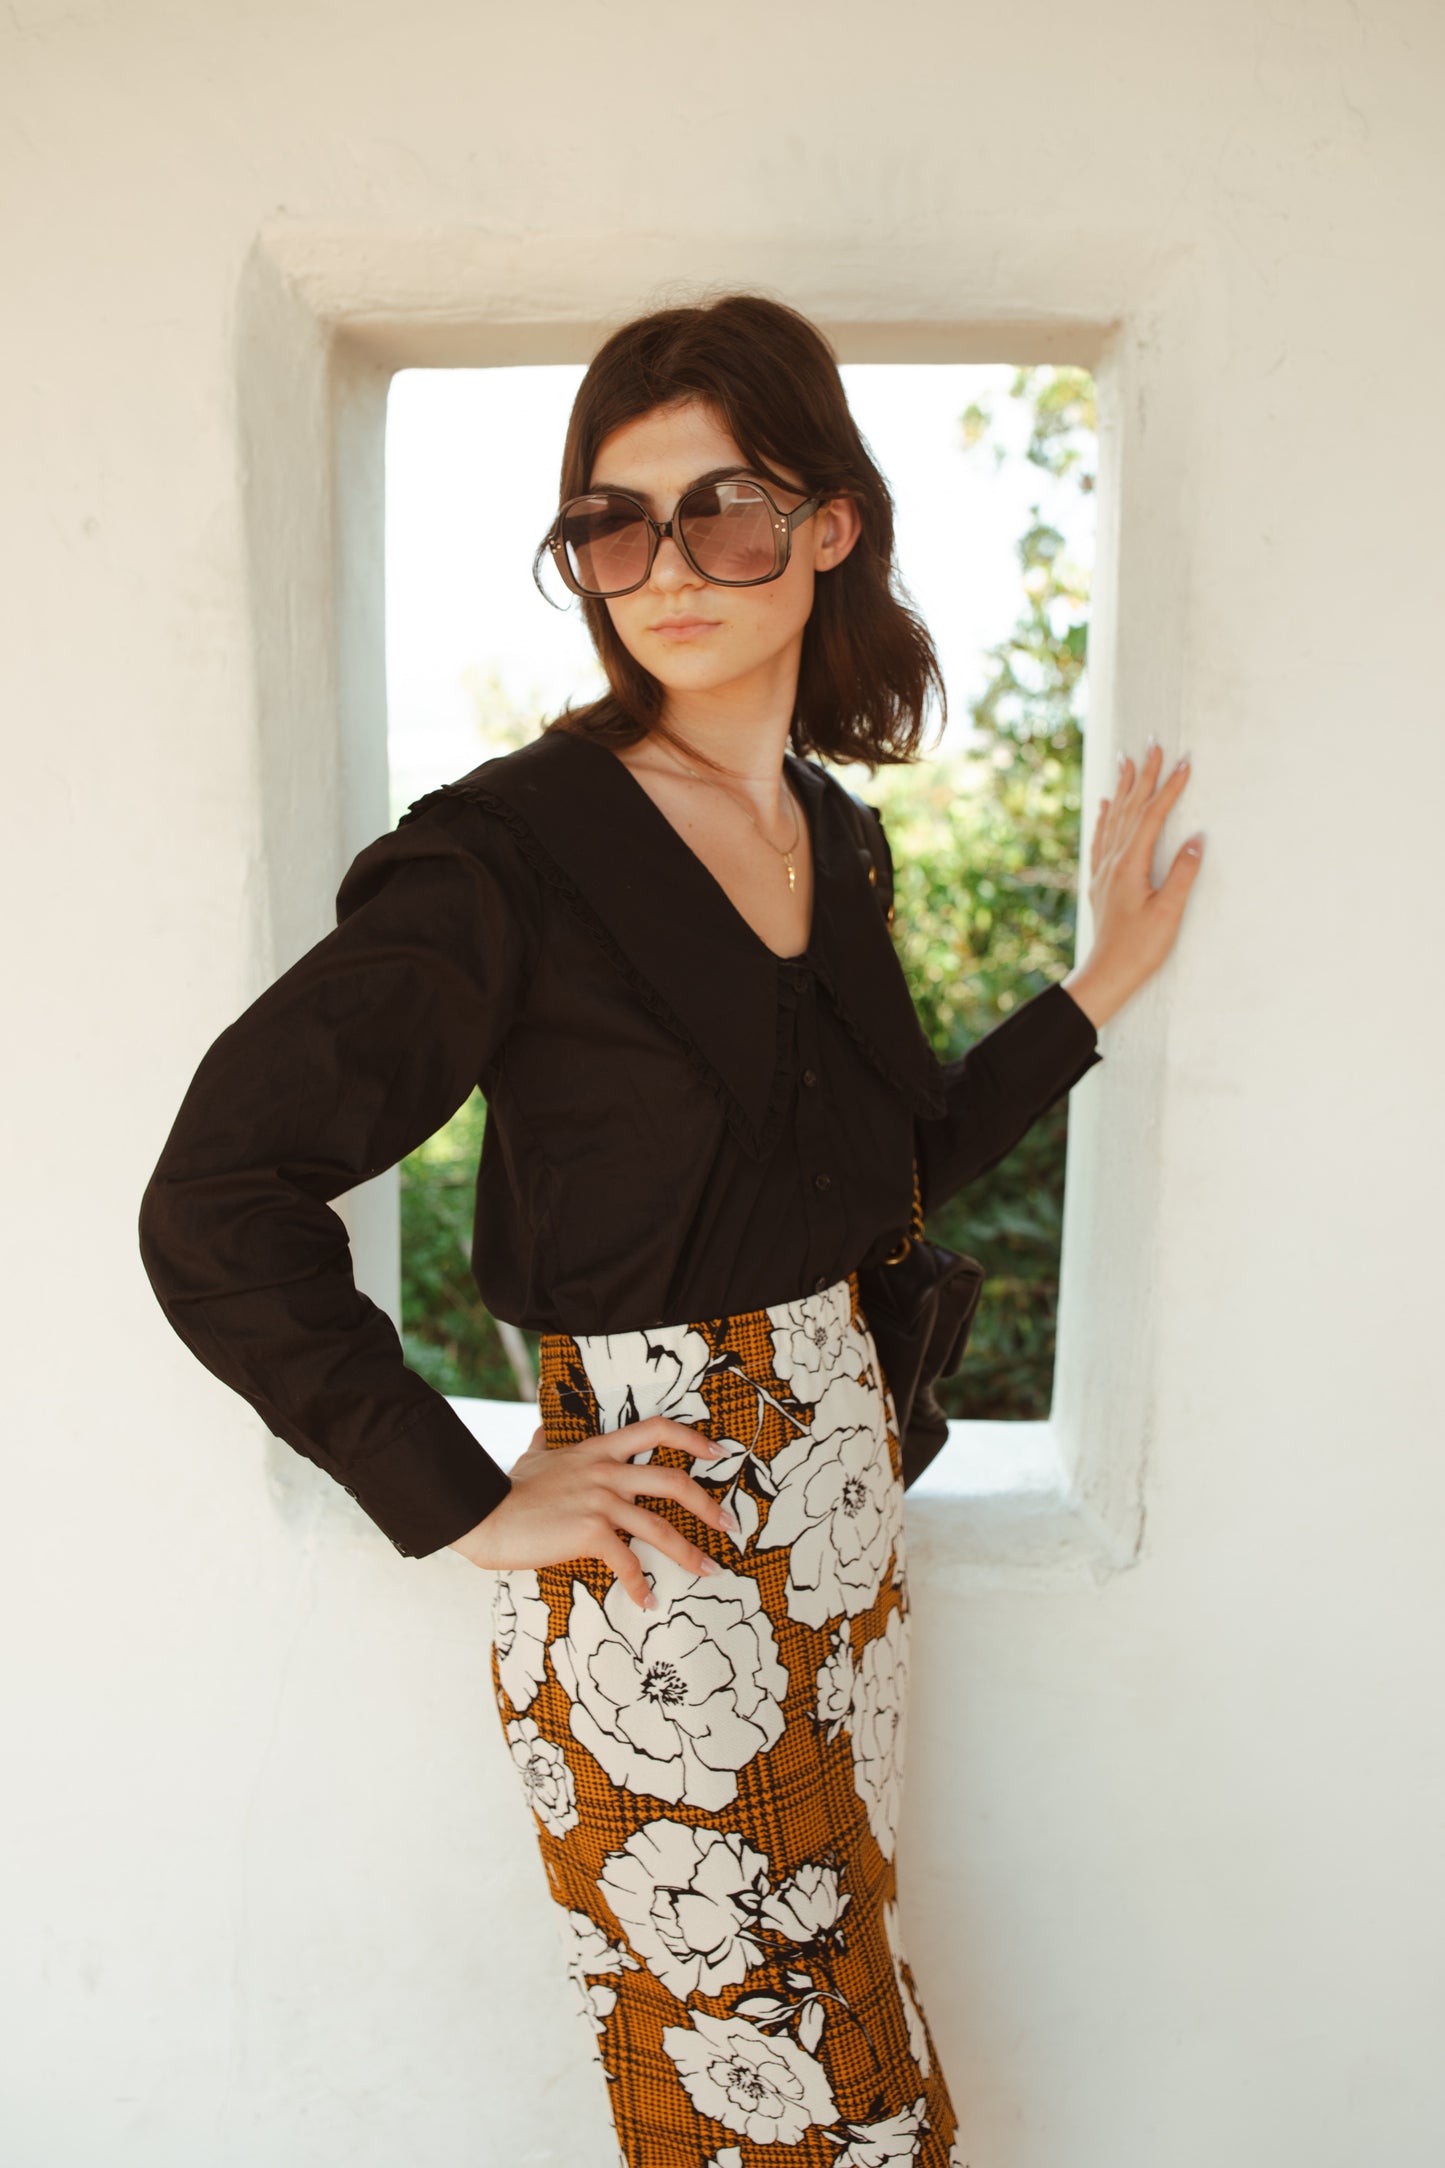 Cognac brown midi pencil skirt featuring black houndstooth pattern overlaid with large, modern, white and black floral print. This skirt is below the knee in length with an elastic waist for comfort. Bohemian floral meets dark academia in style.